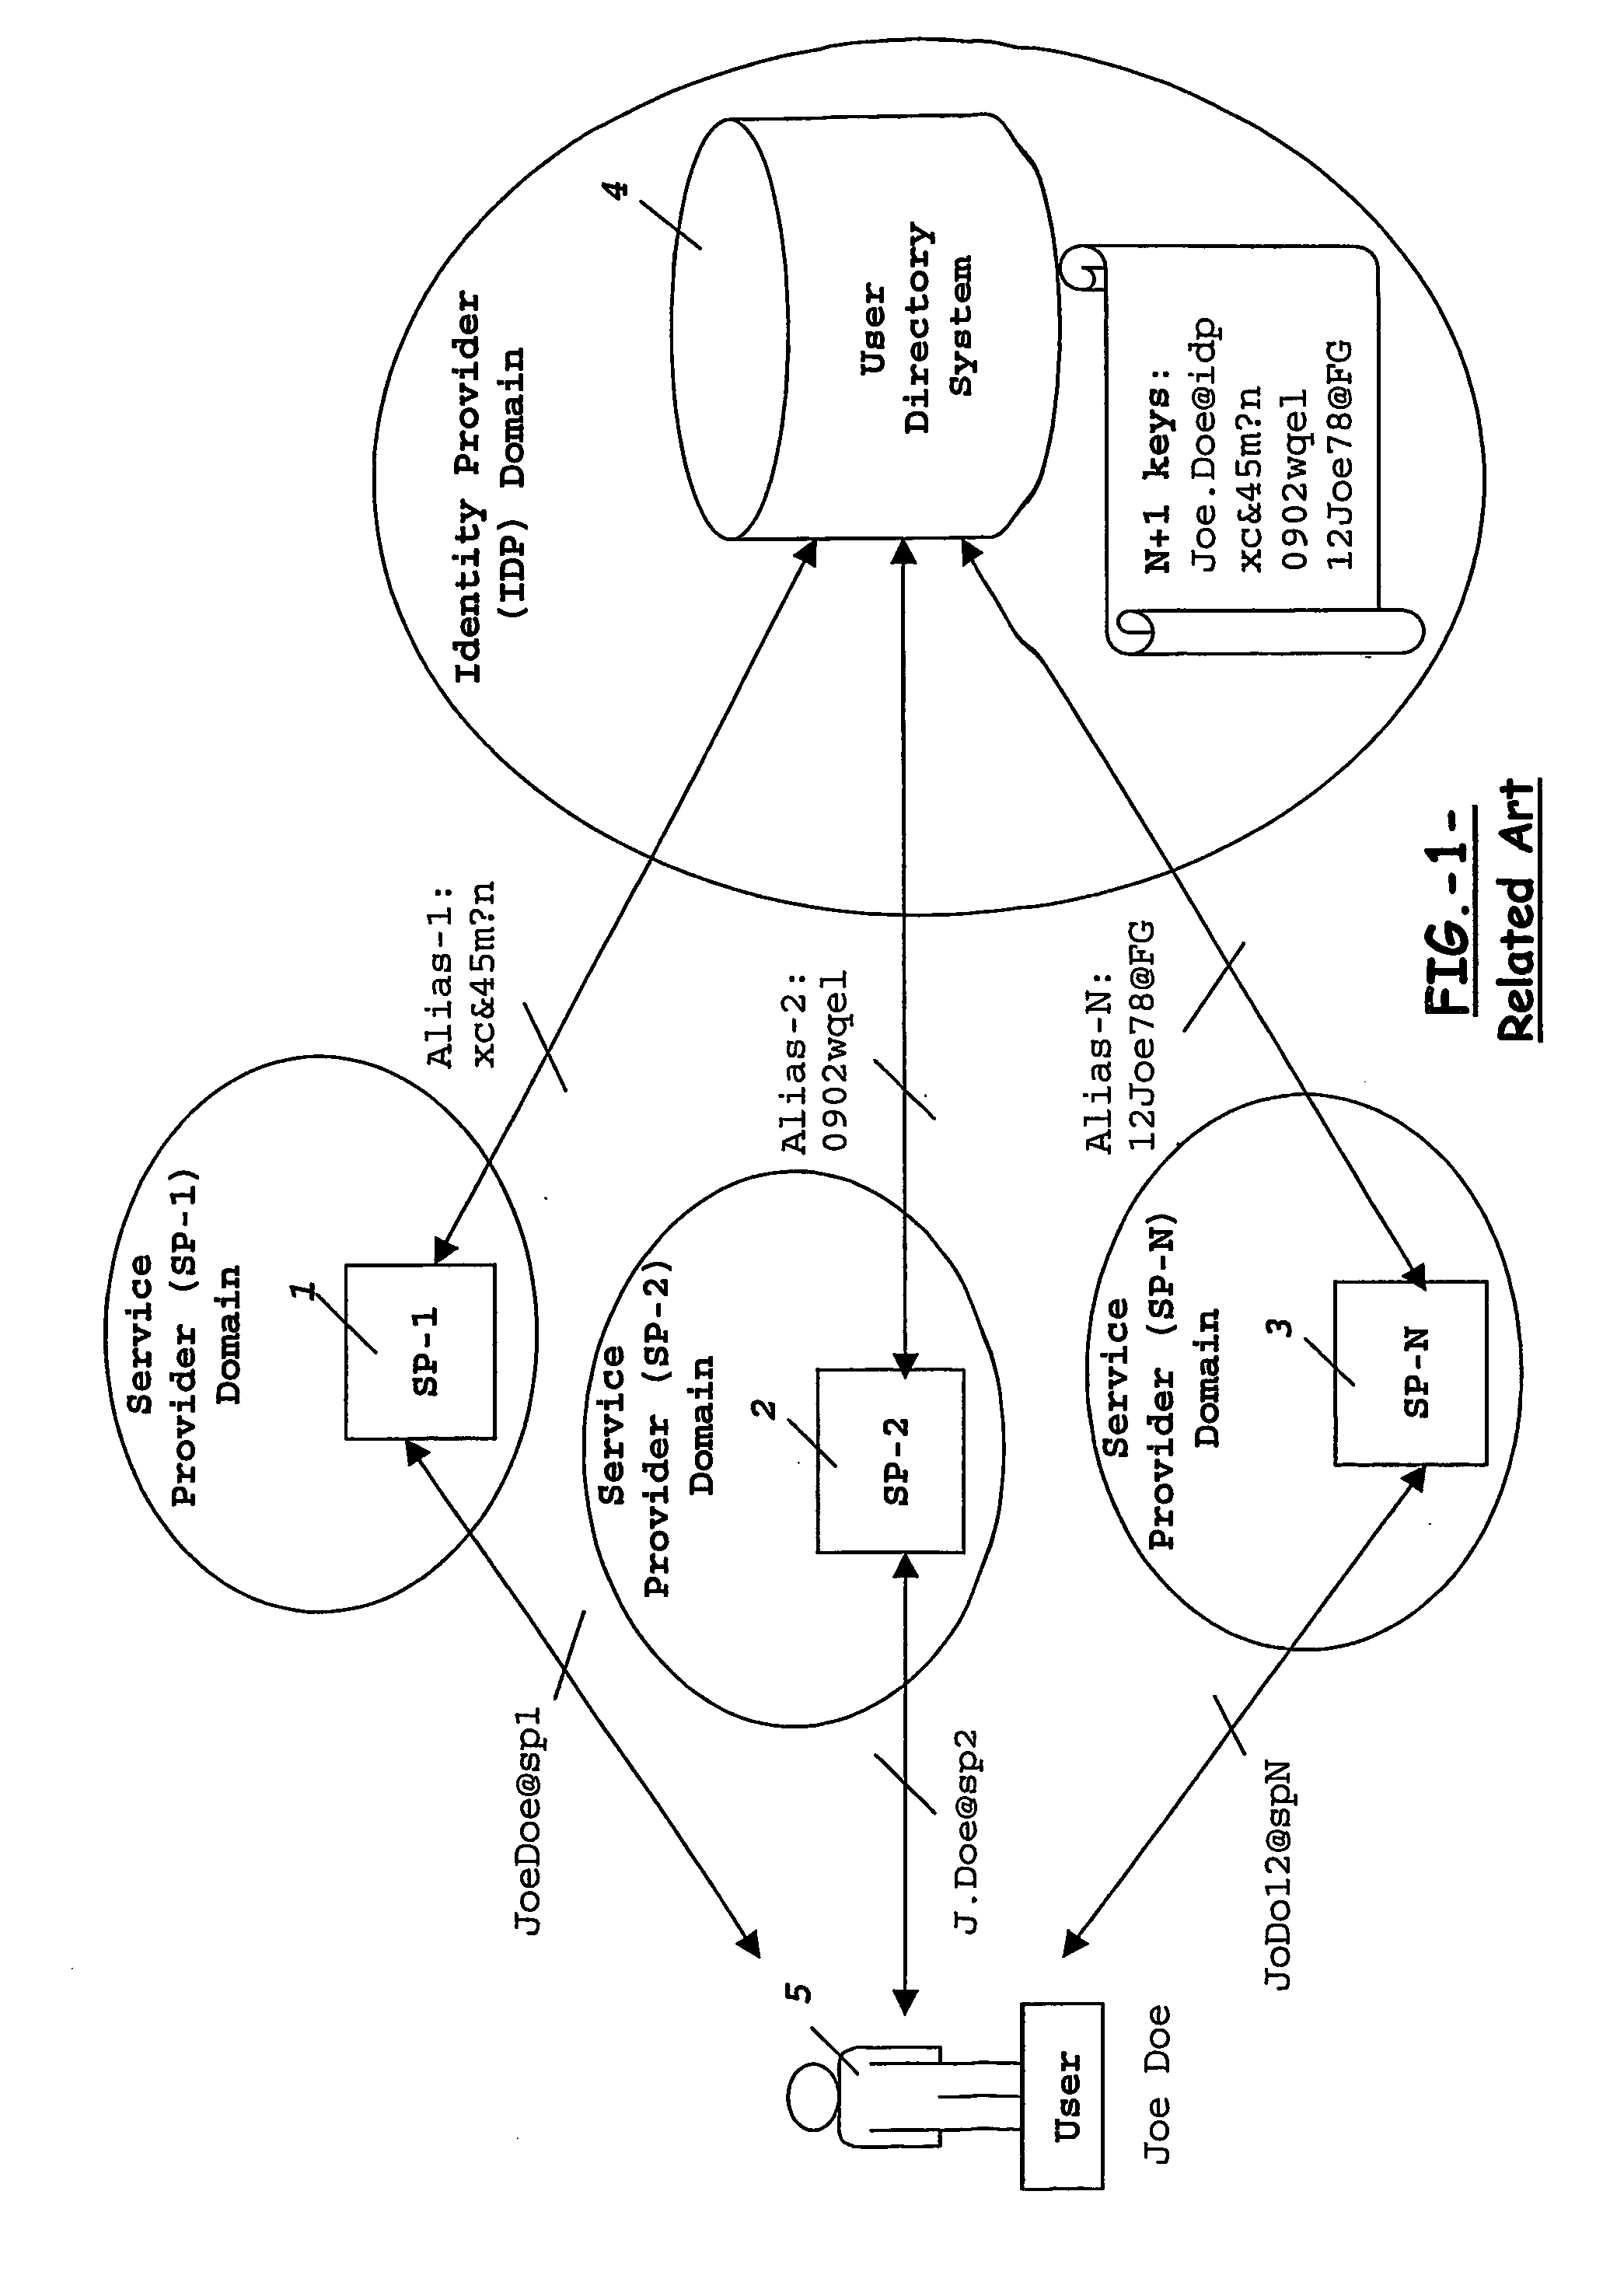 Means and method for generating a unique user's identity for use between different domains